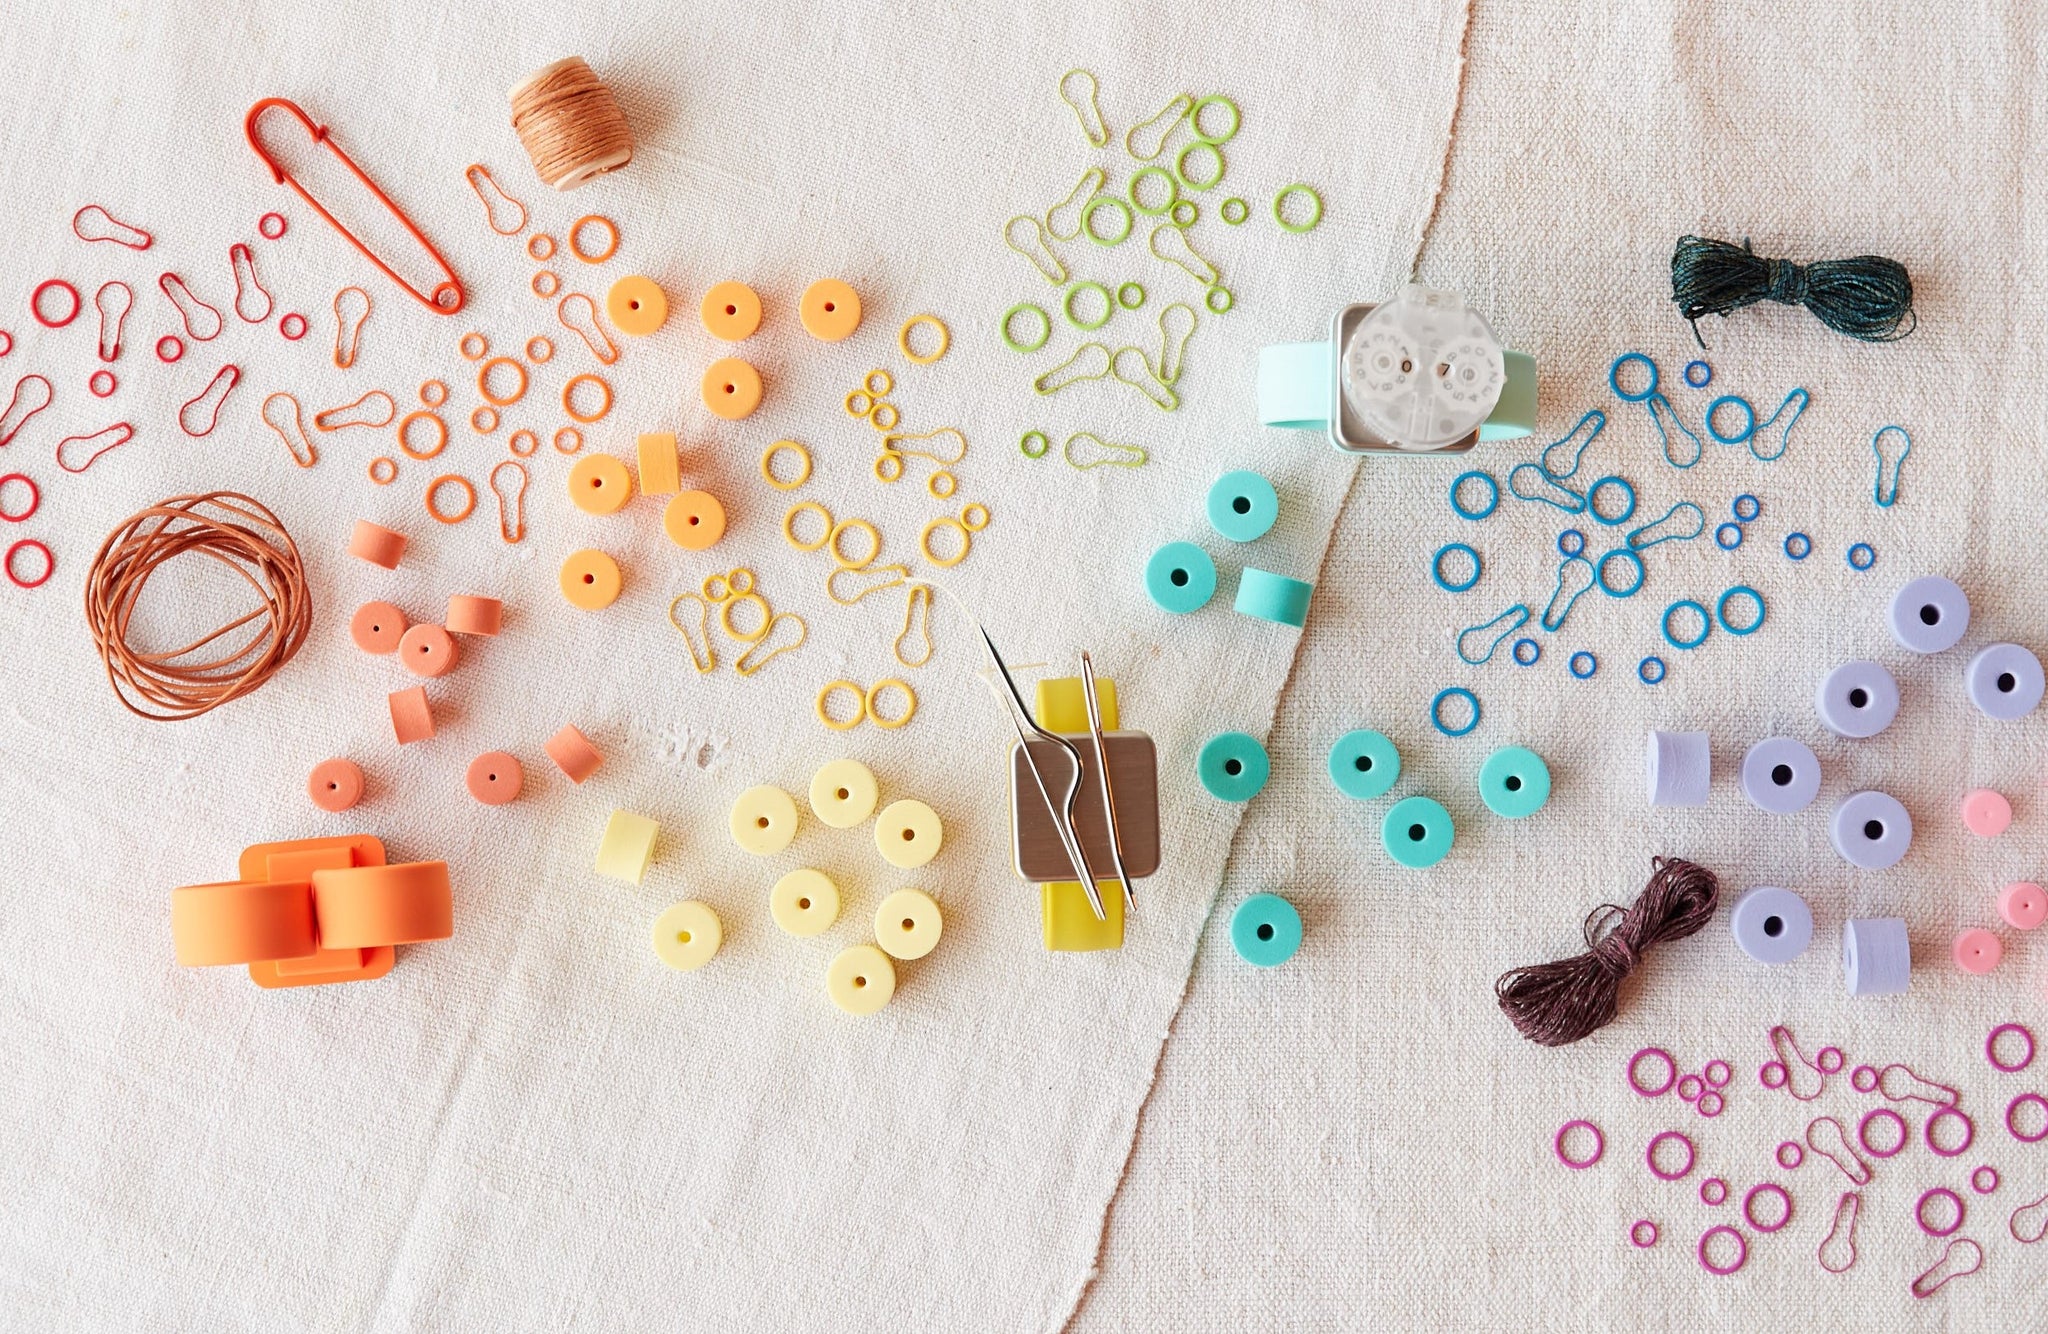 Colorful Ring Stitch Markers - Original